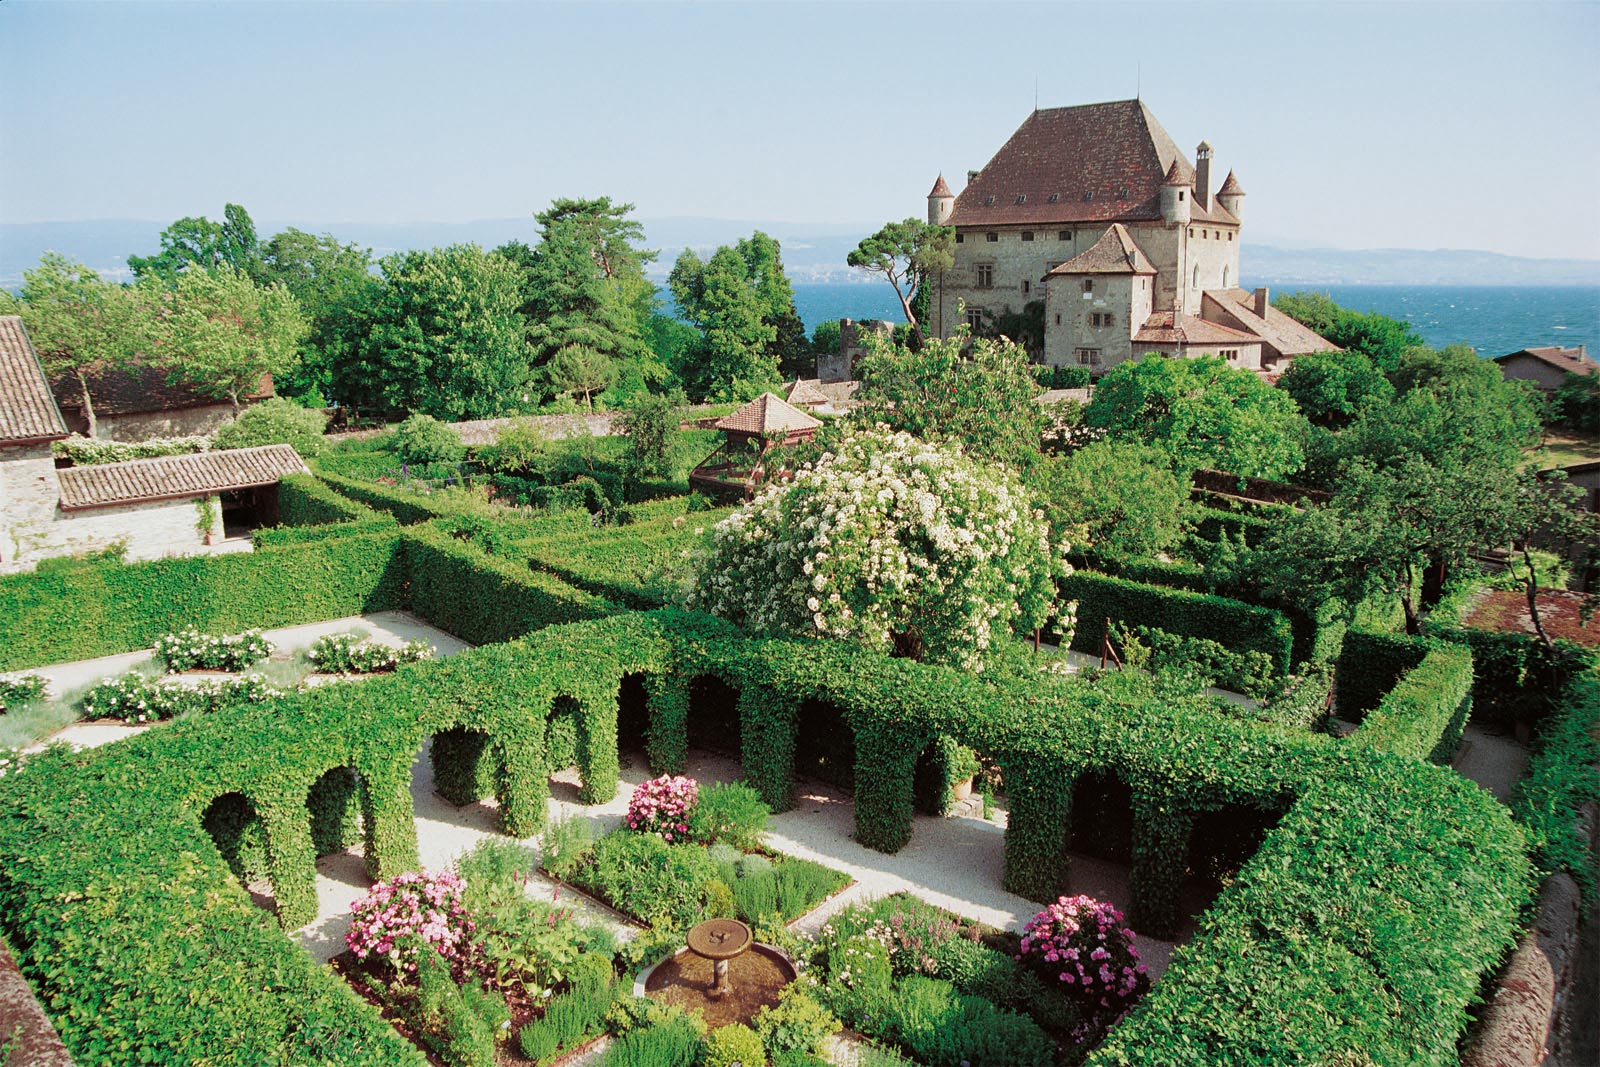 The Labyrinth - Garden of Five Senses in Yvoire (France)